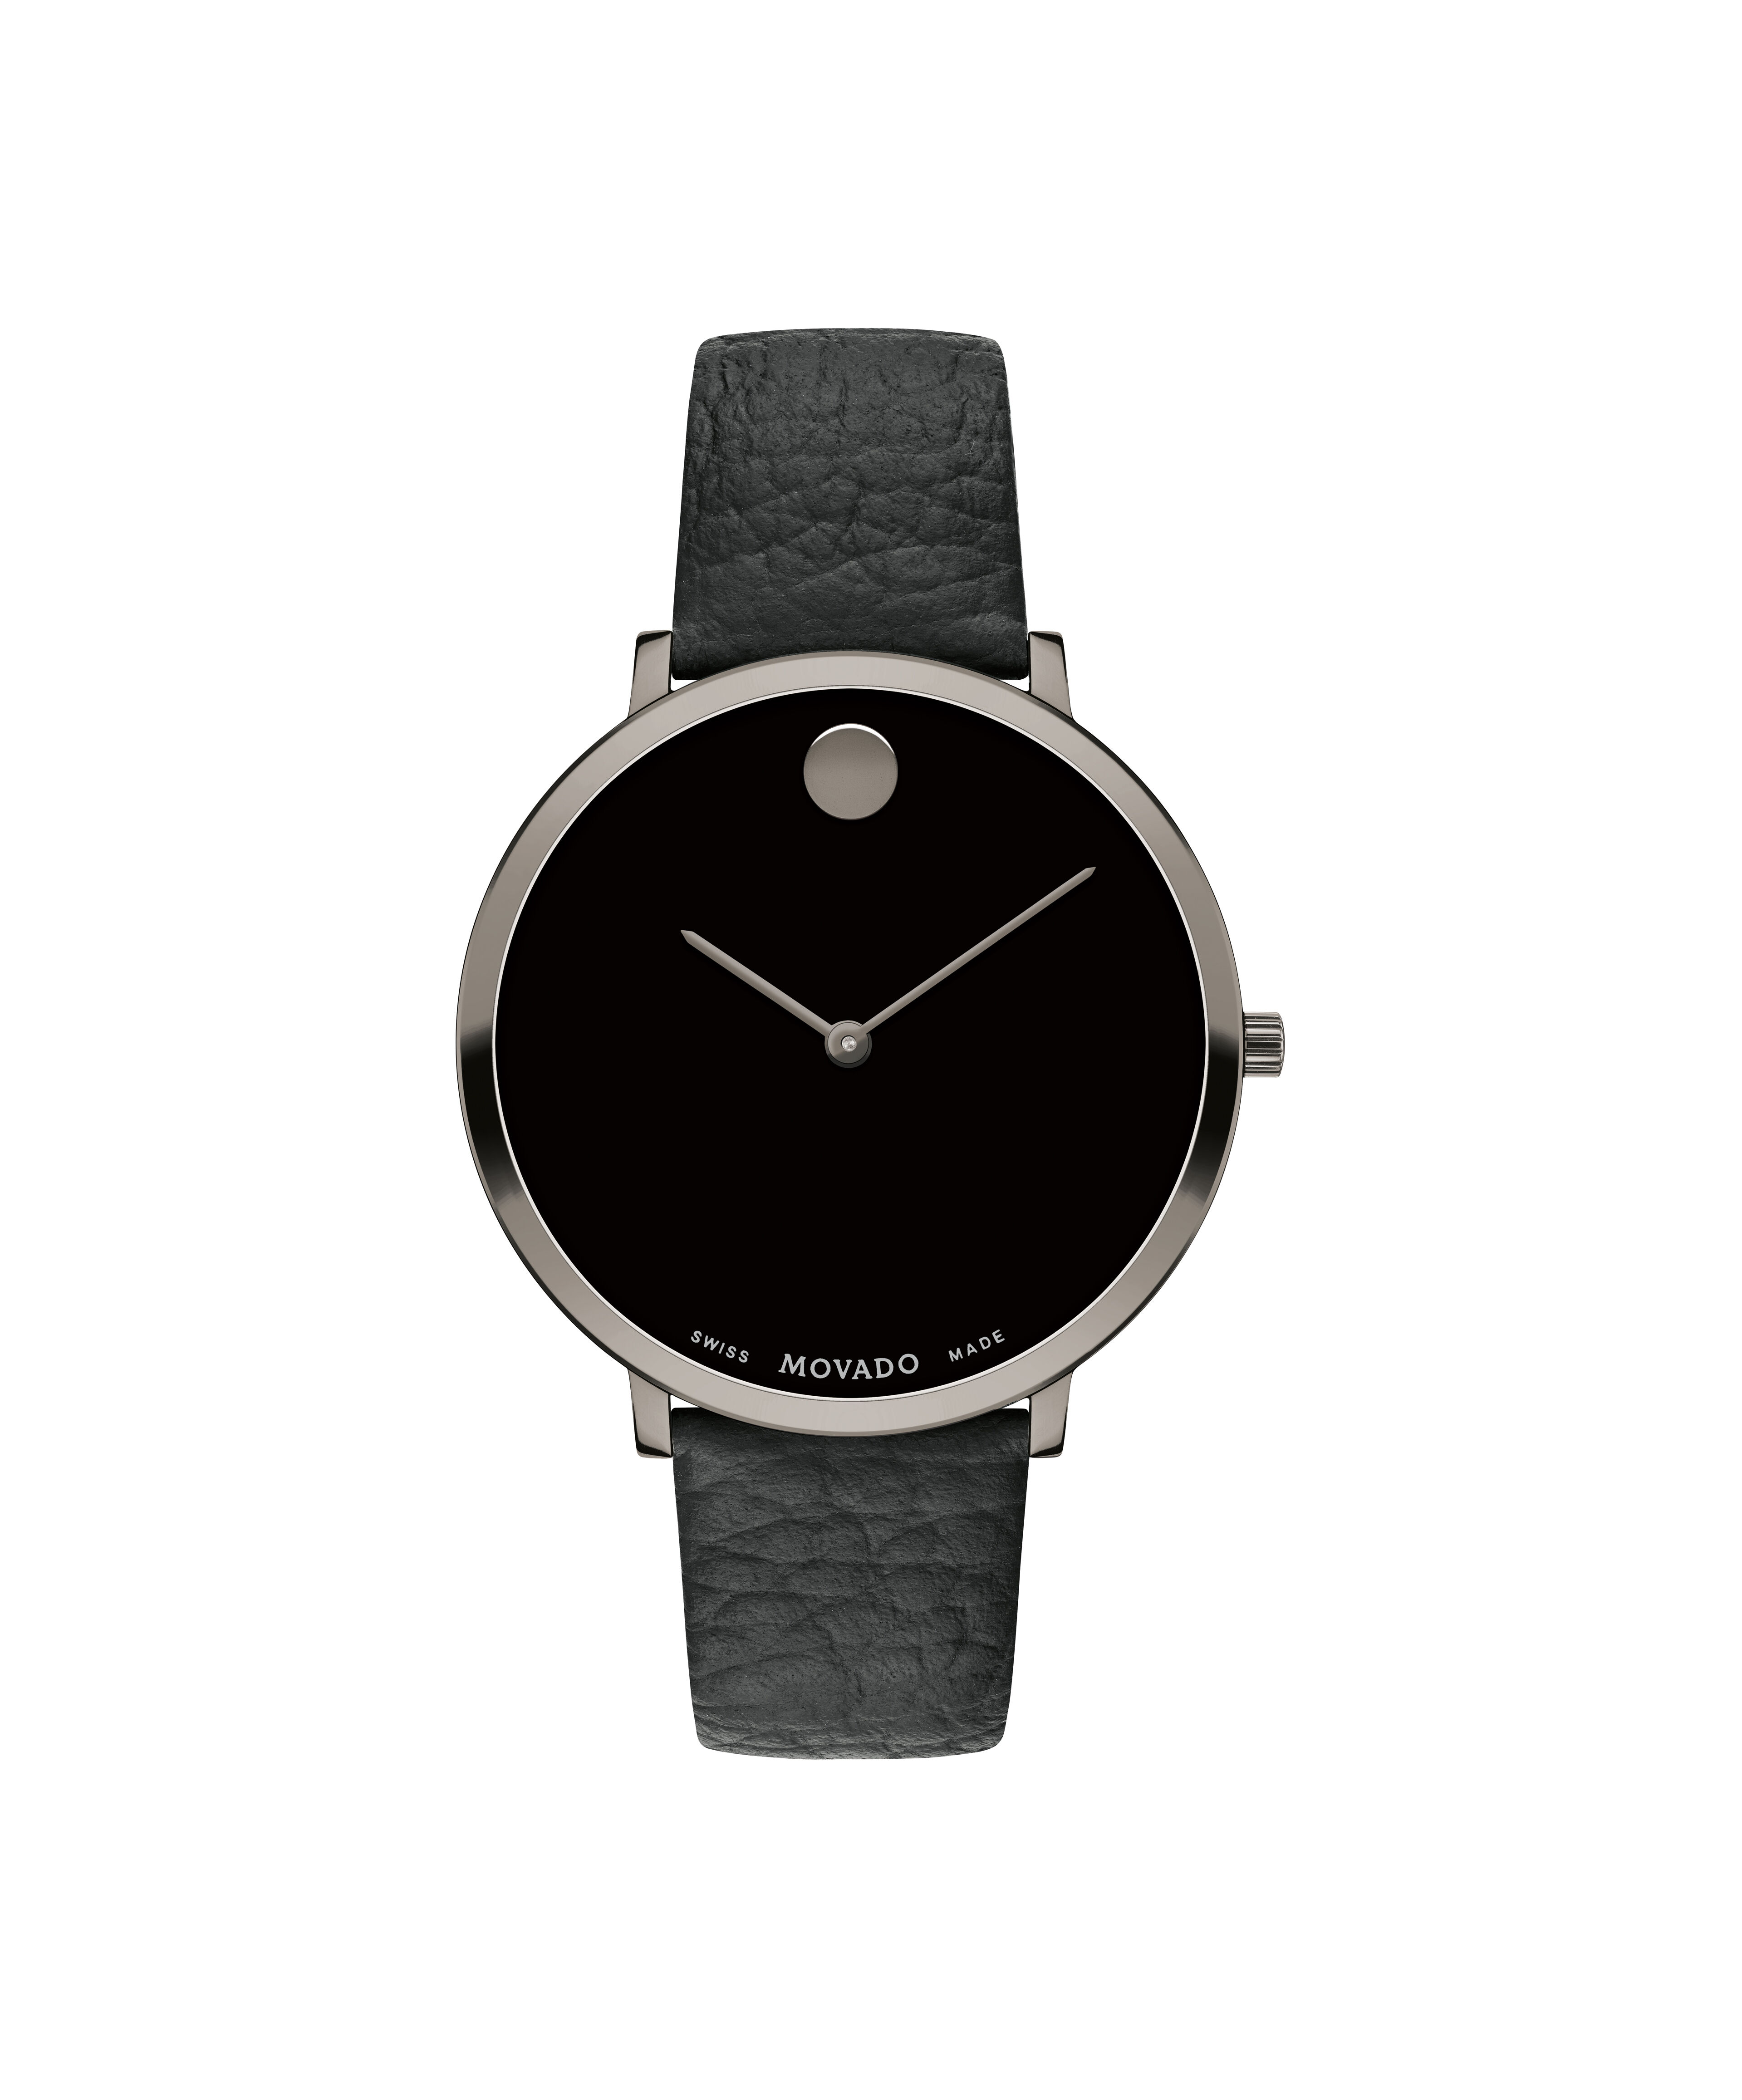 Copy A Lange Sohne Watches